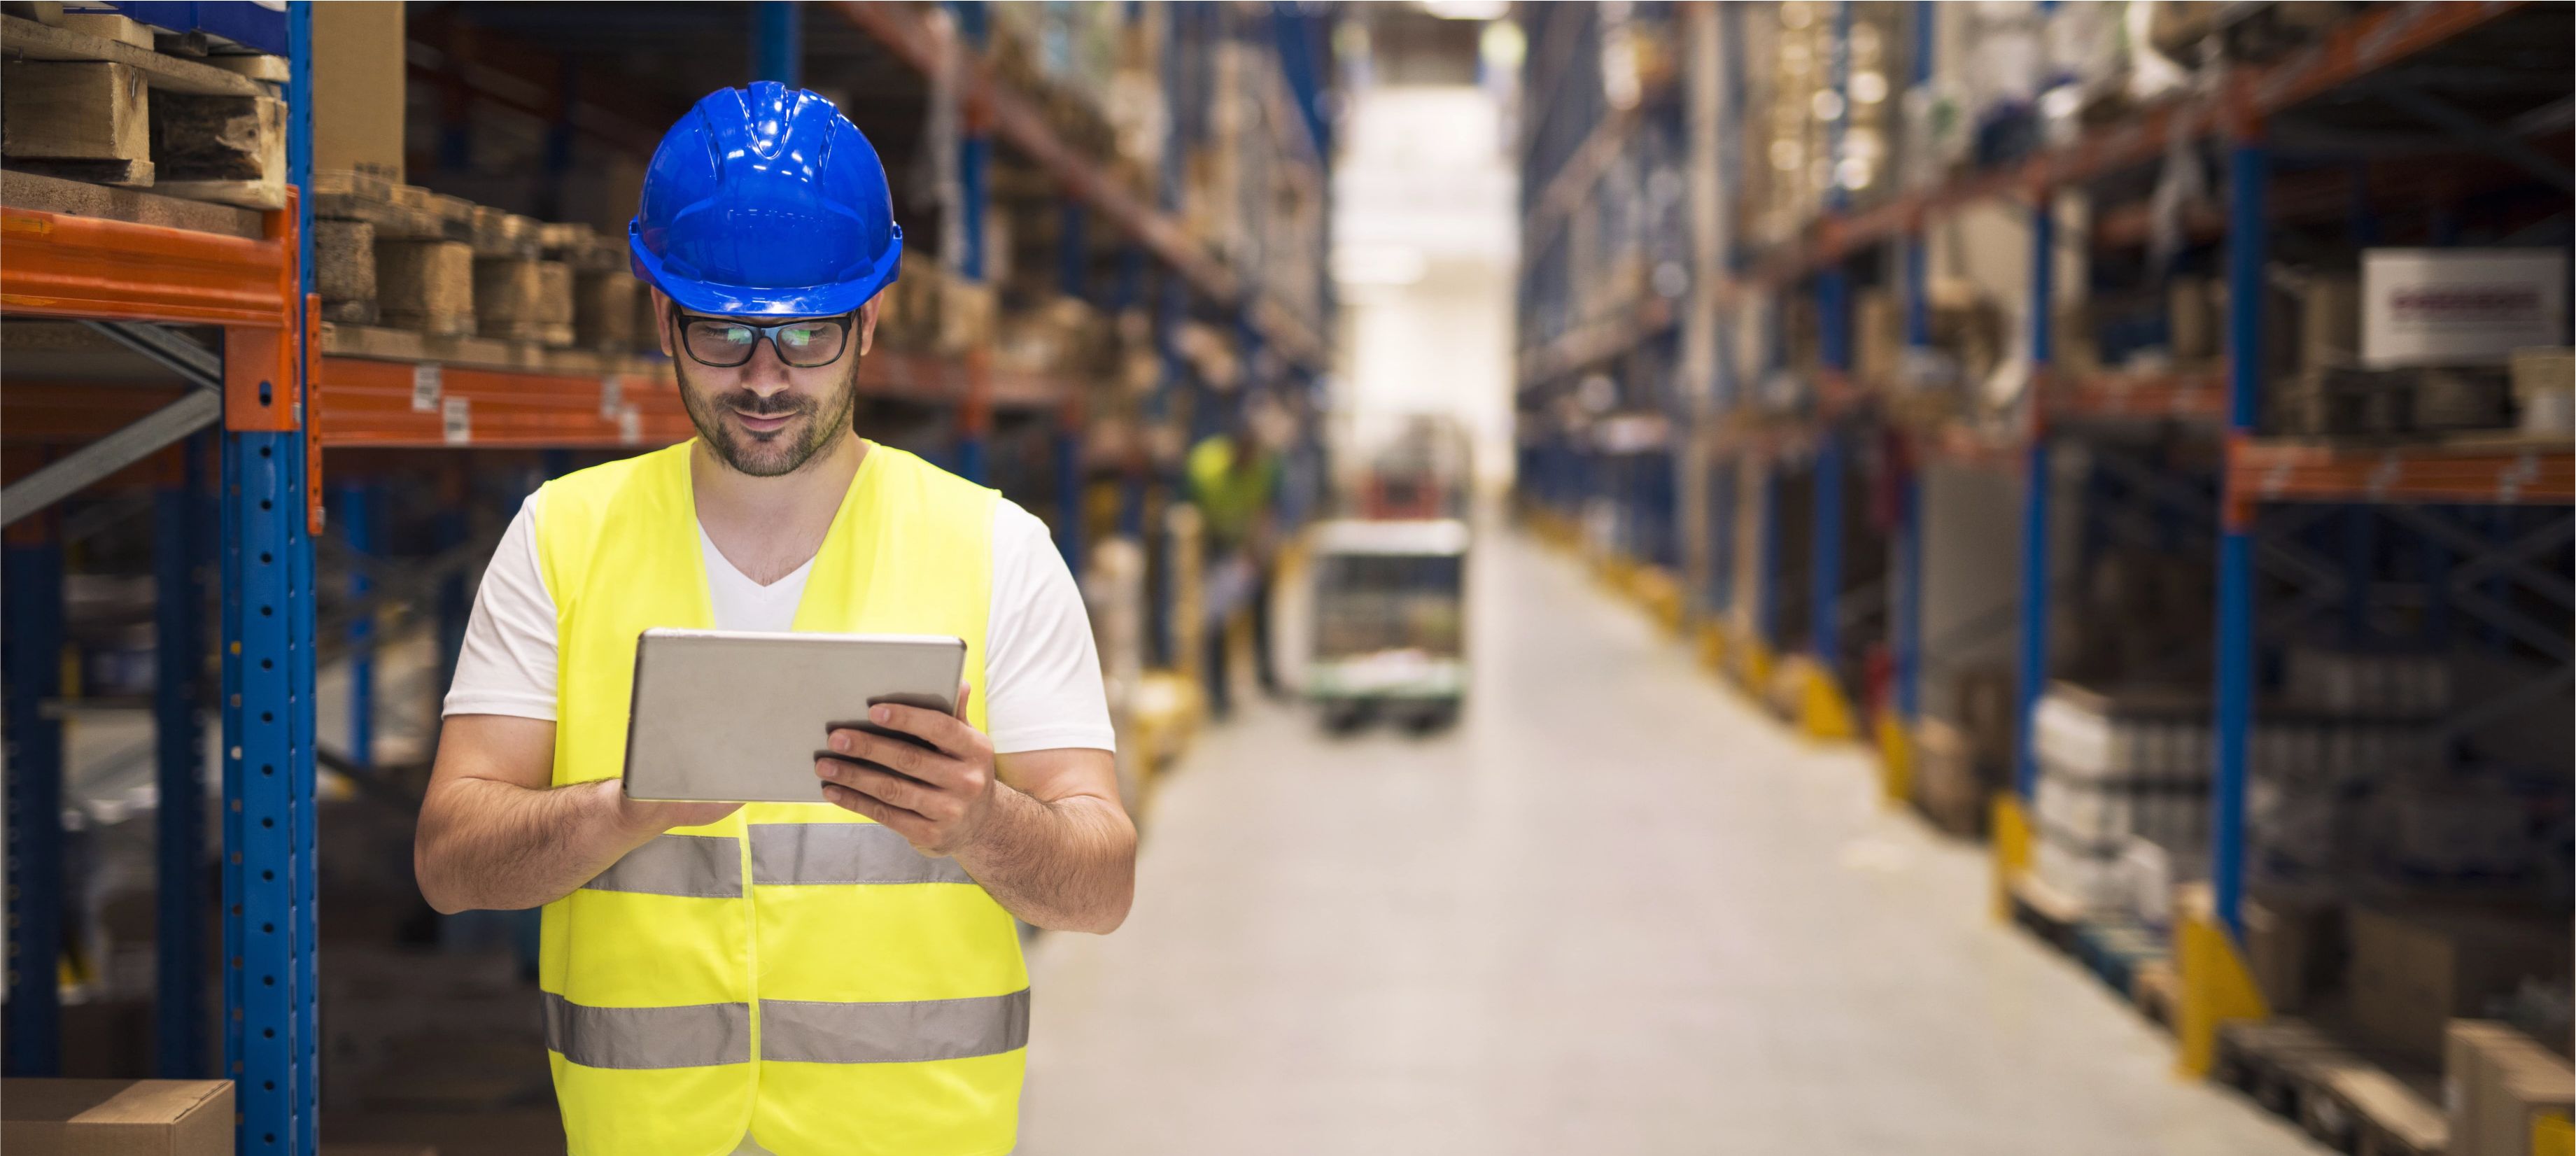 3 Differences Between Inventory   Management and Warehouse Management